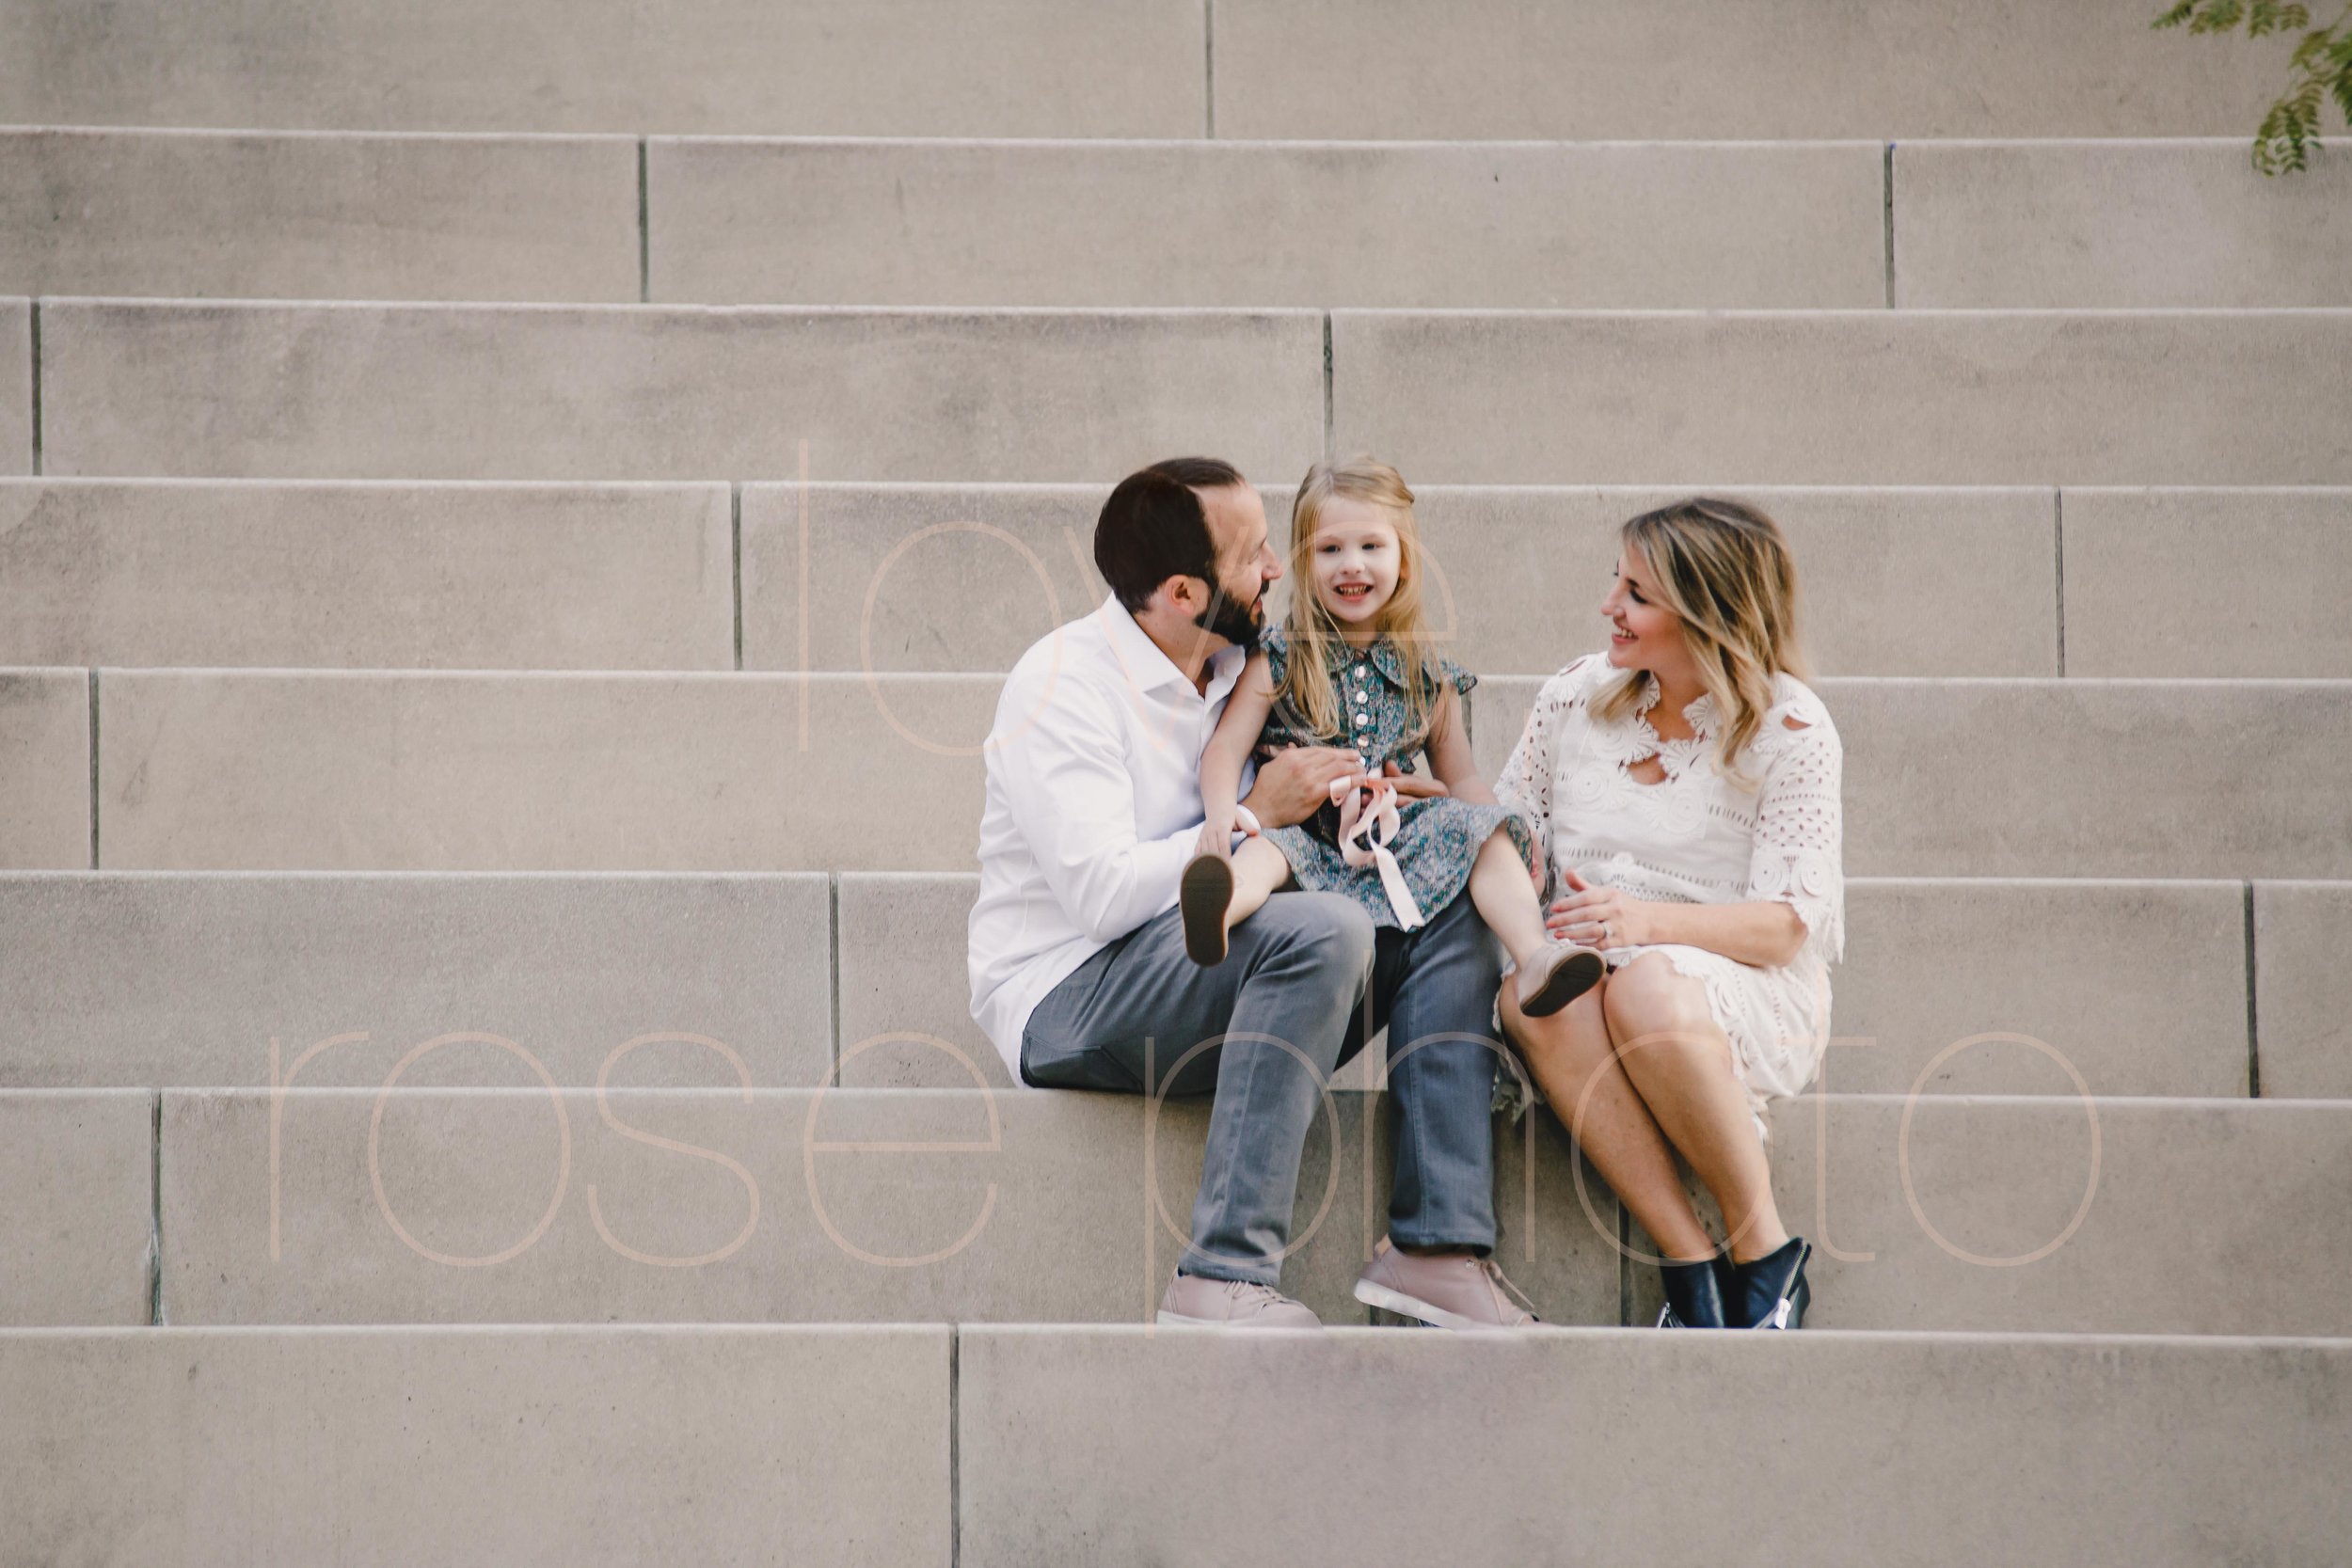 Lifestyle Photographer Chicago kids photos family shoot by Rose Photo -11.jpg